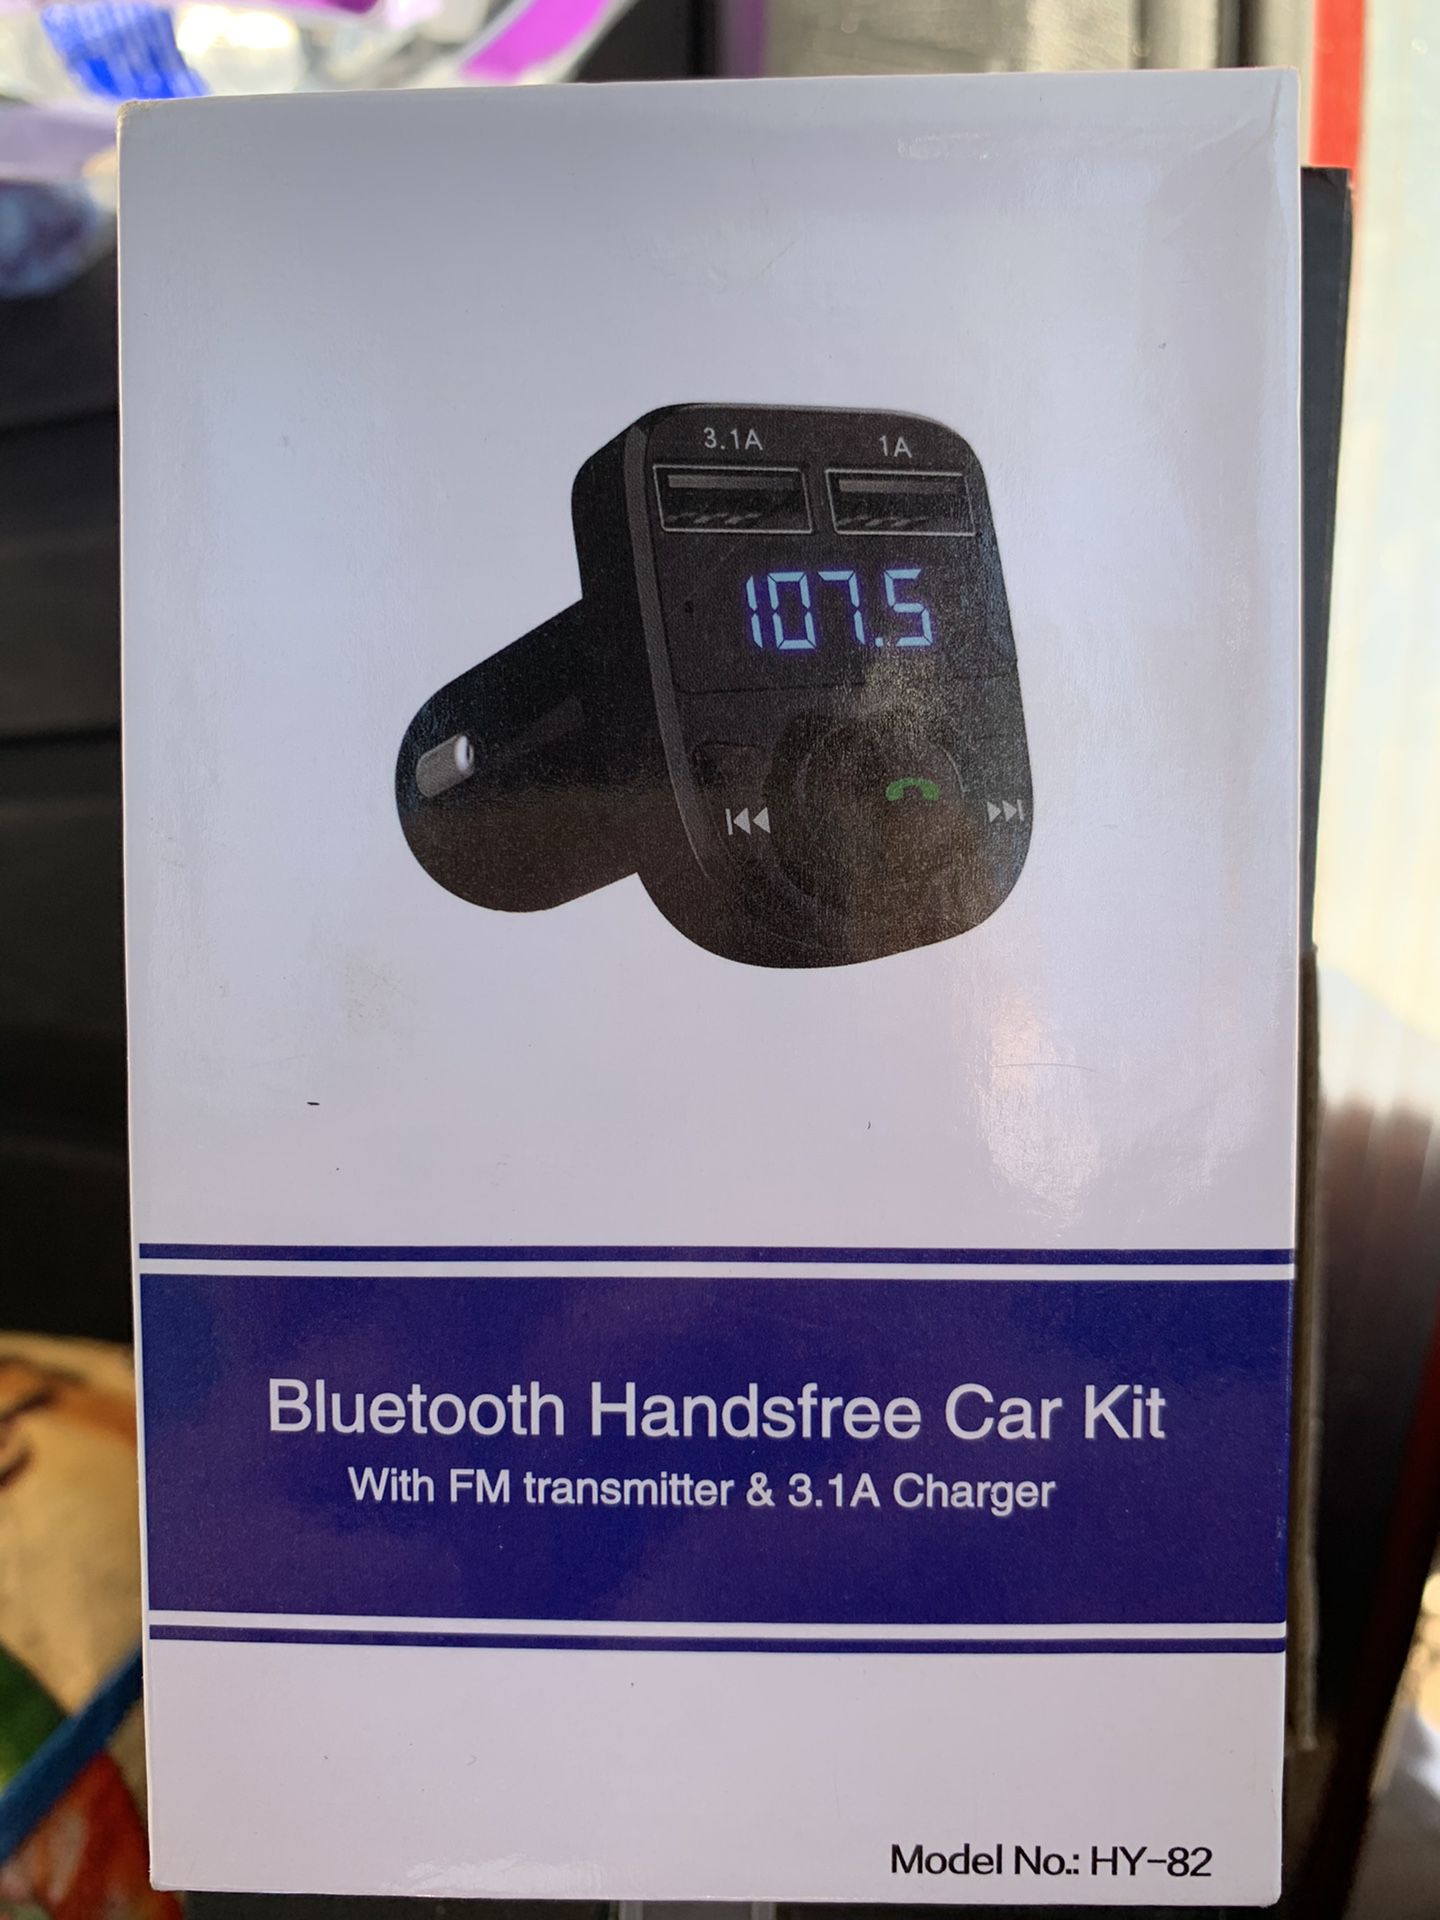 Bluetooth Handsfree Car Kit - With FM transmitter & 3.1A Charger